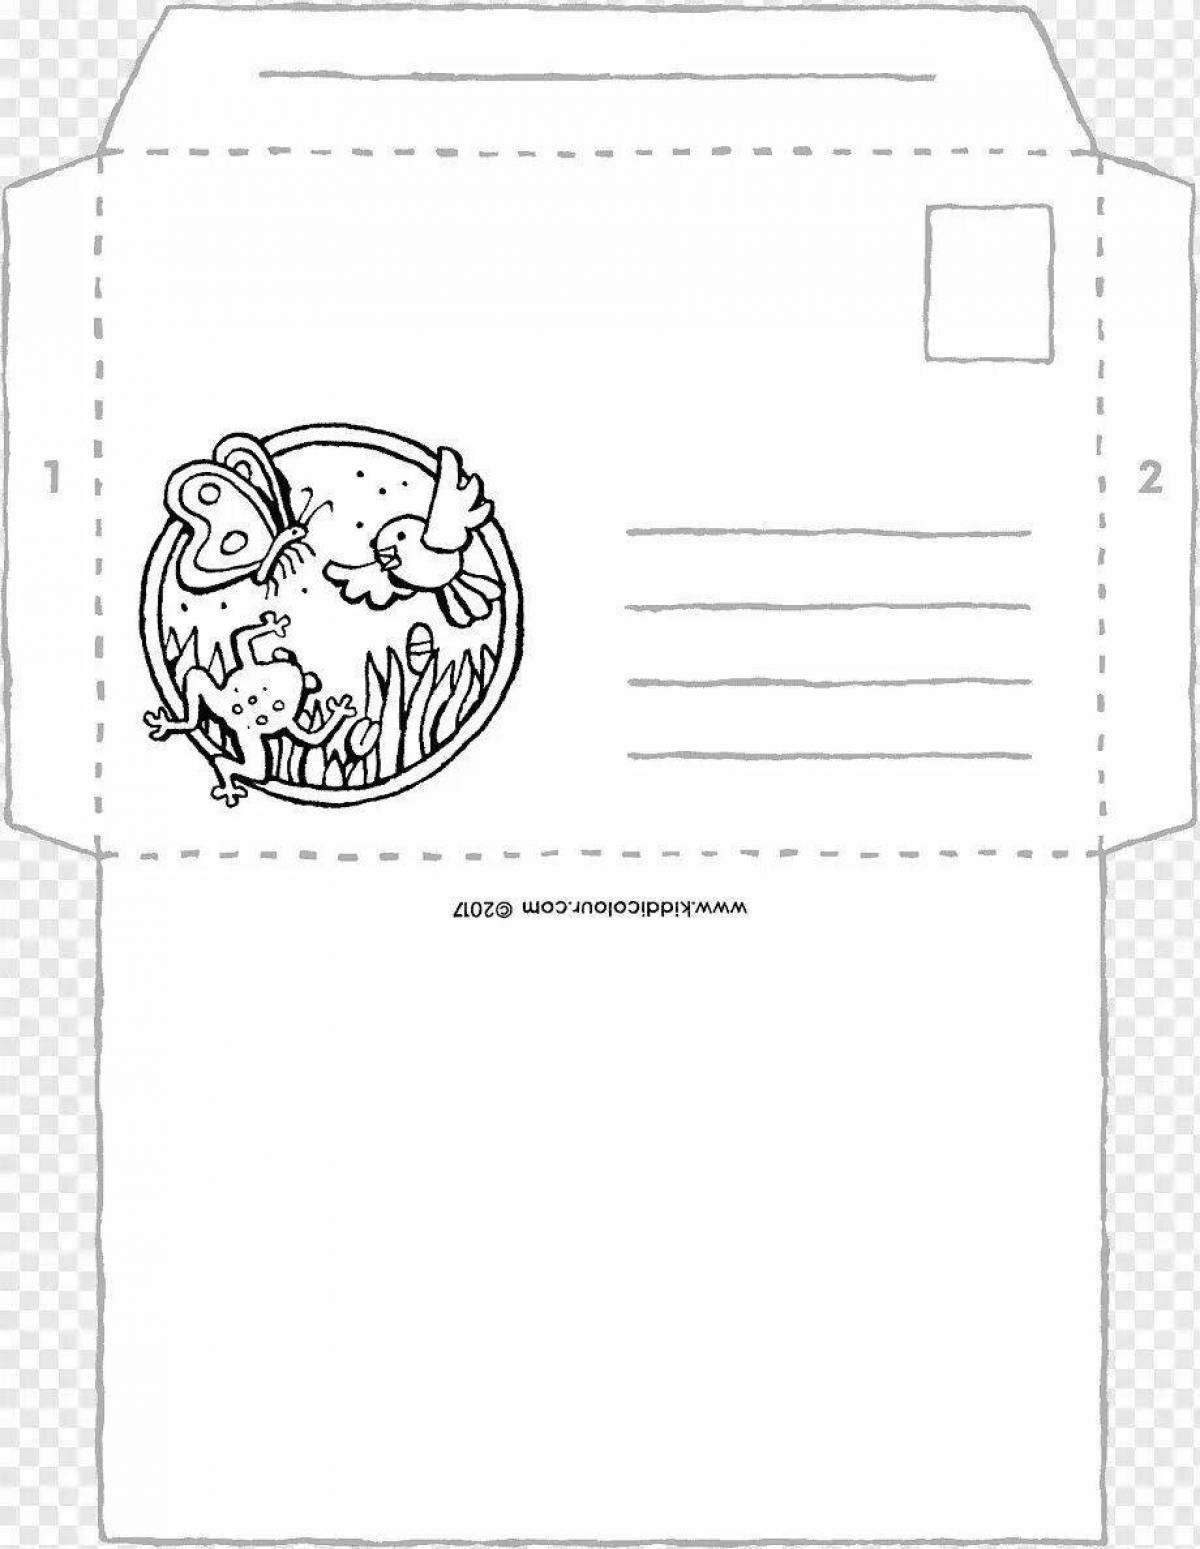 Playful envelope coloring page